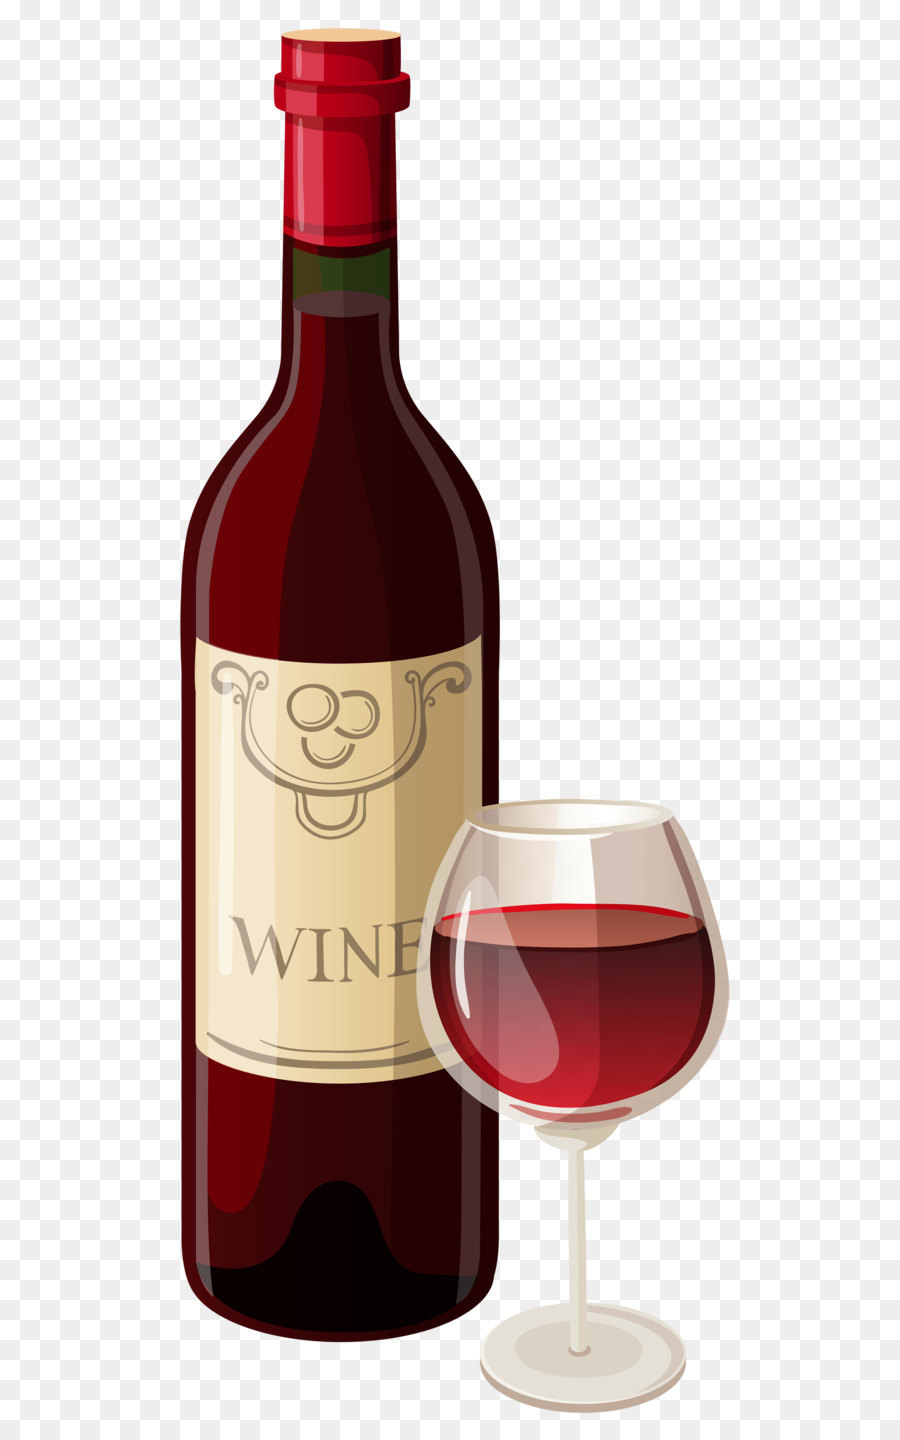 Red Wine Champagne Bottle Clip art - Wine Bottle and Glass PNG Vector Clipart png download - 2237*4946 - Free Transparent Red Wine png Download.